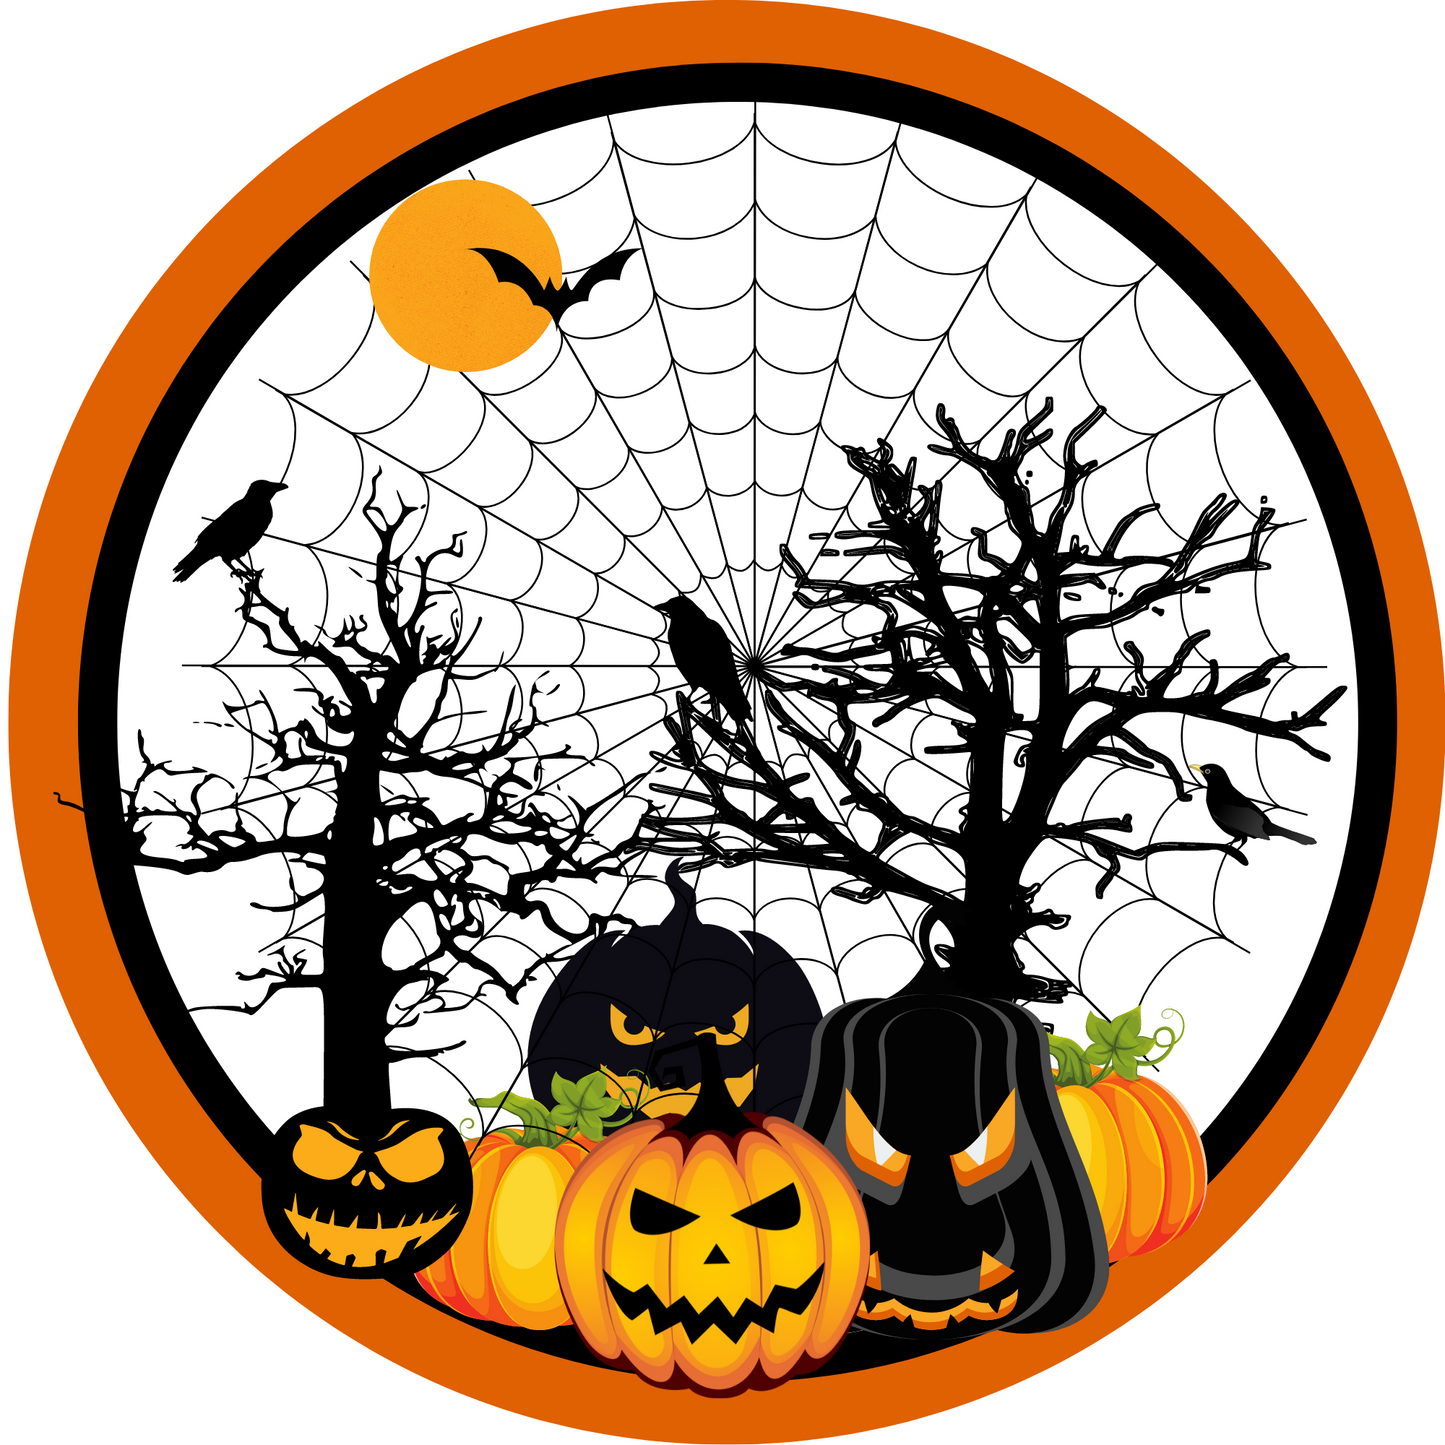 Halloween Orange and Black Pumpkin, dead trees, spider web and crows sign